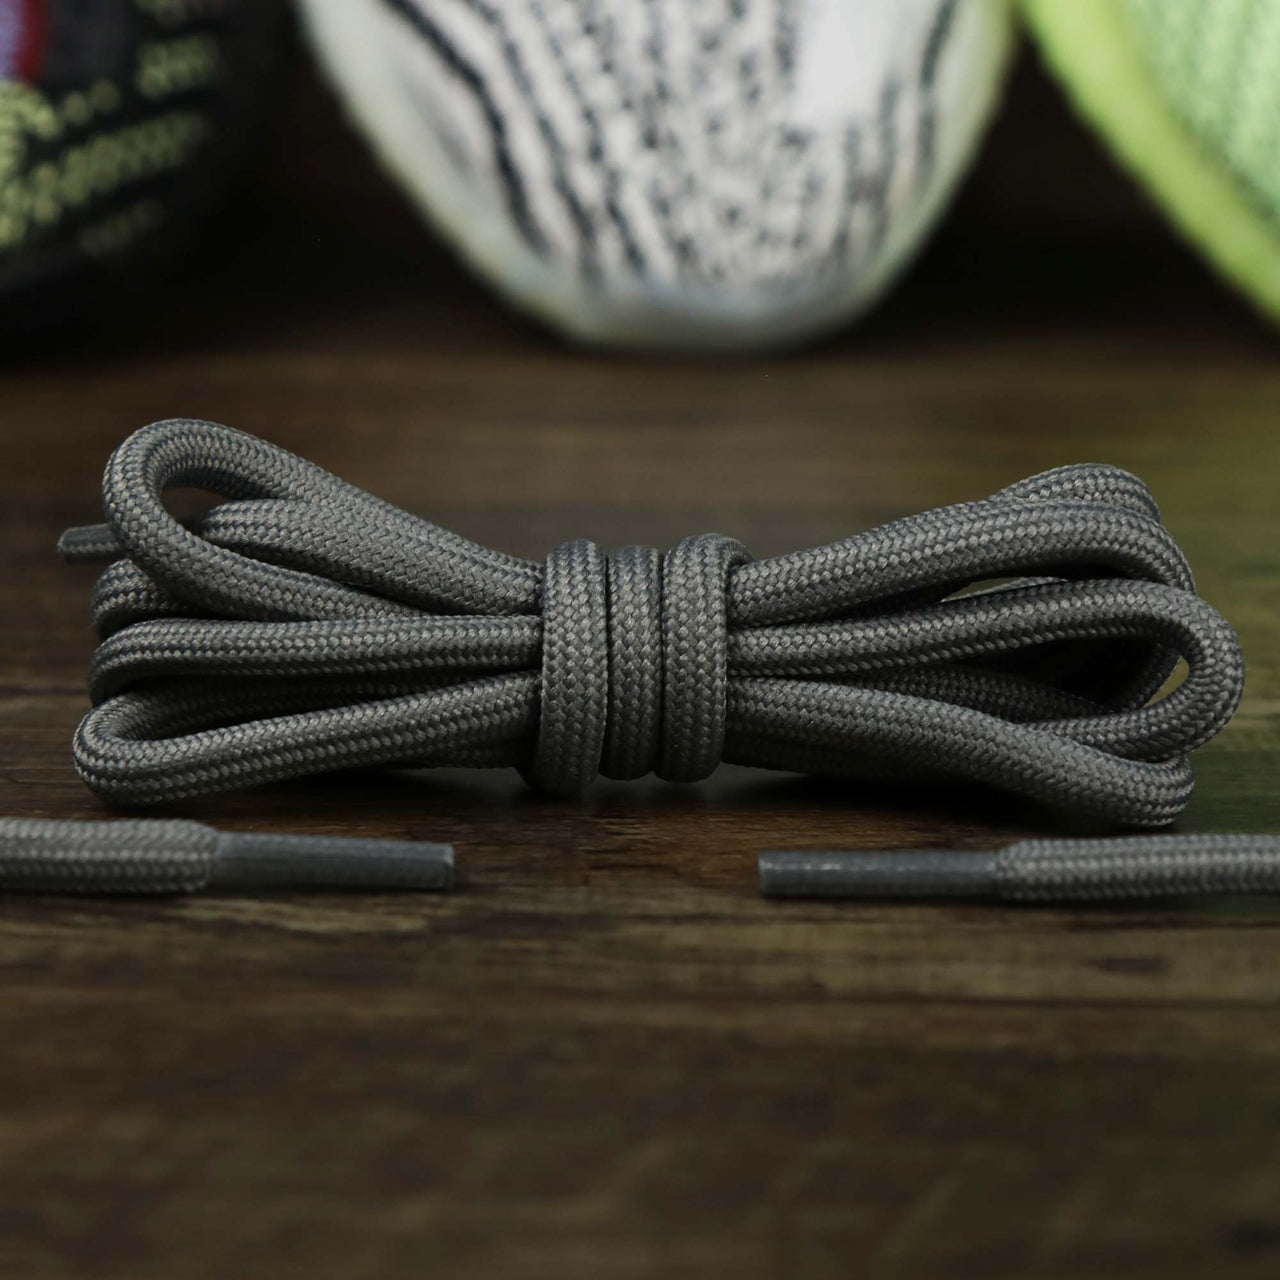 The Solid Rope Dark Grey Shoelaces with Dark Grey Aglets | 120cm Capswag folded up